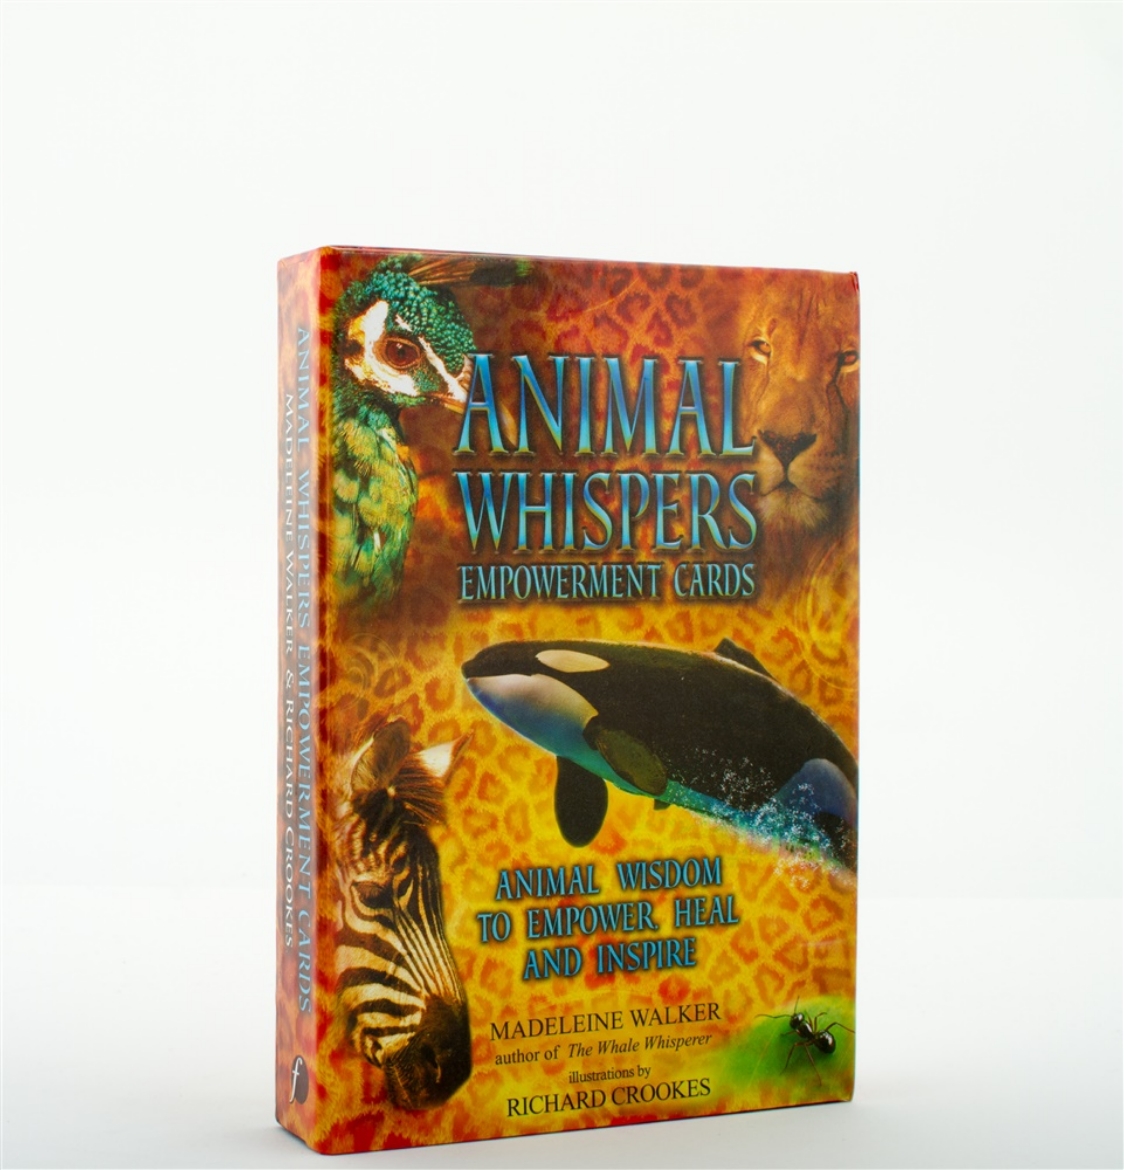 Picture of Animal Whispers Empowerment Cards: Animal Wisdom to Empower, Heal and Inspire